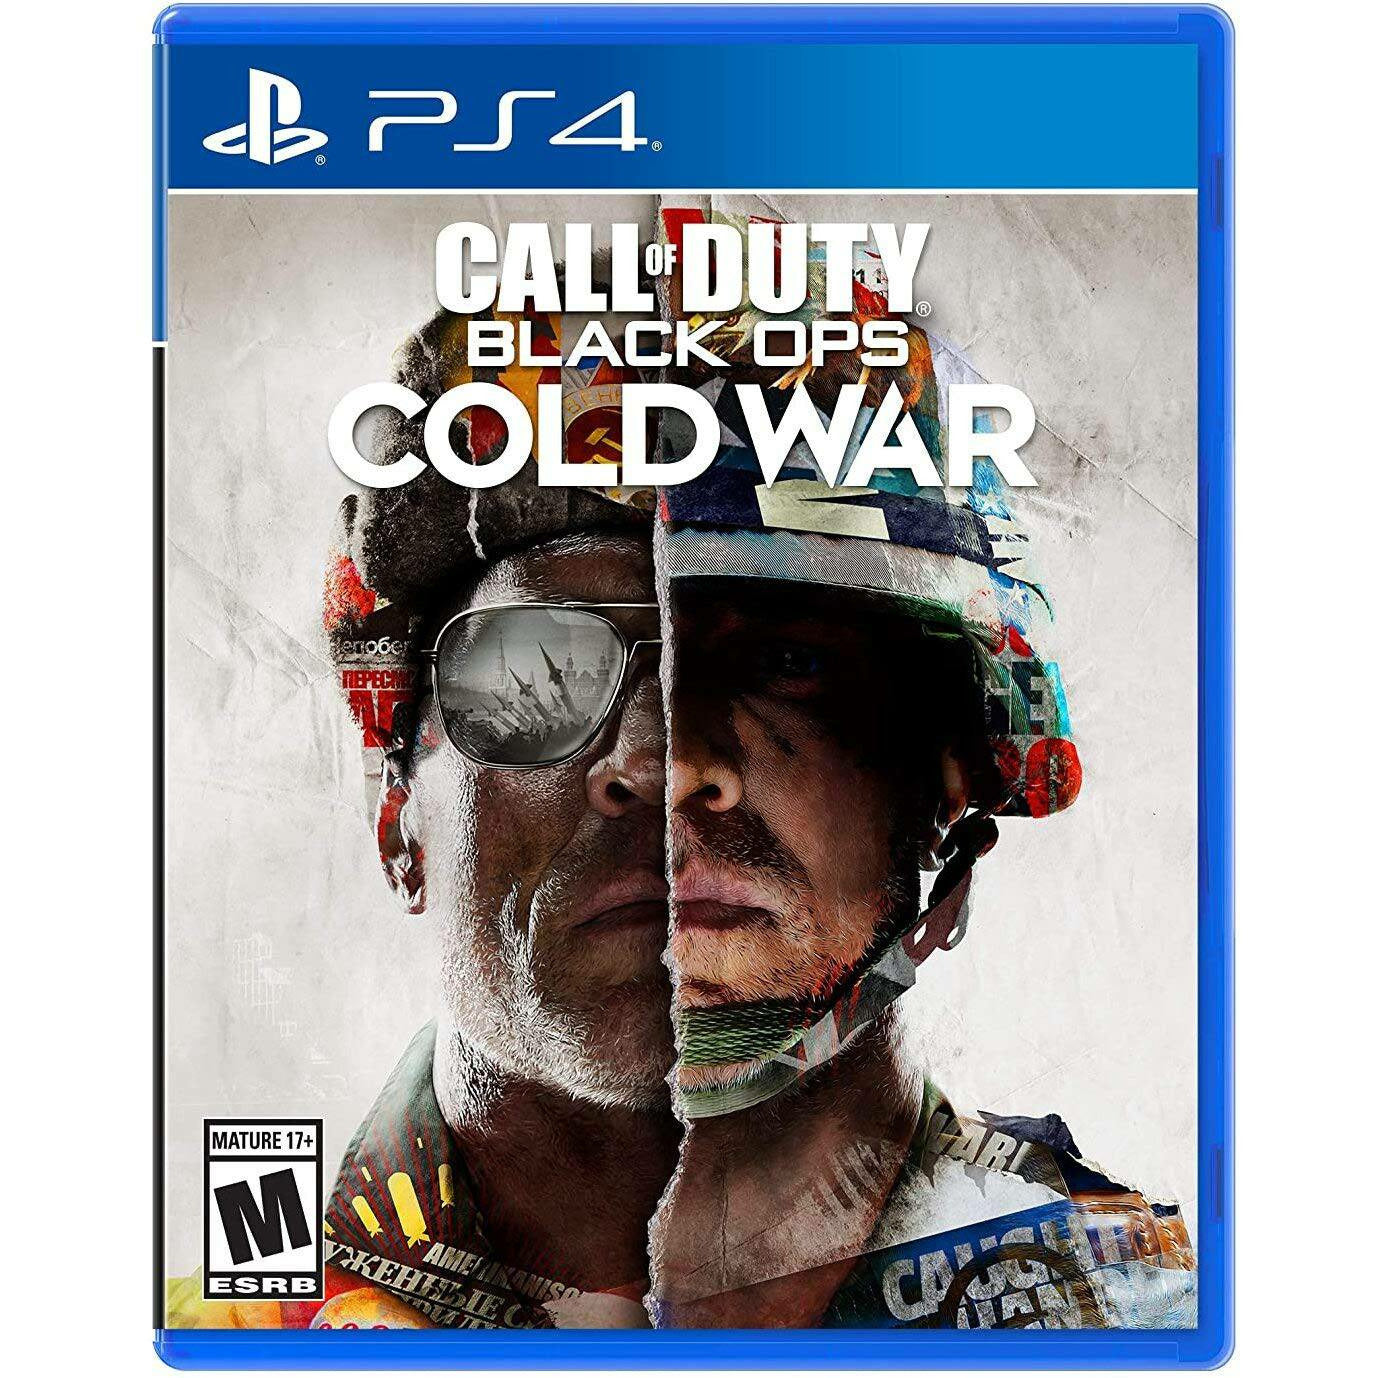 Call of Duty: Black Ops: Cold War para PlayStation 4 - Gshop Pty